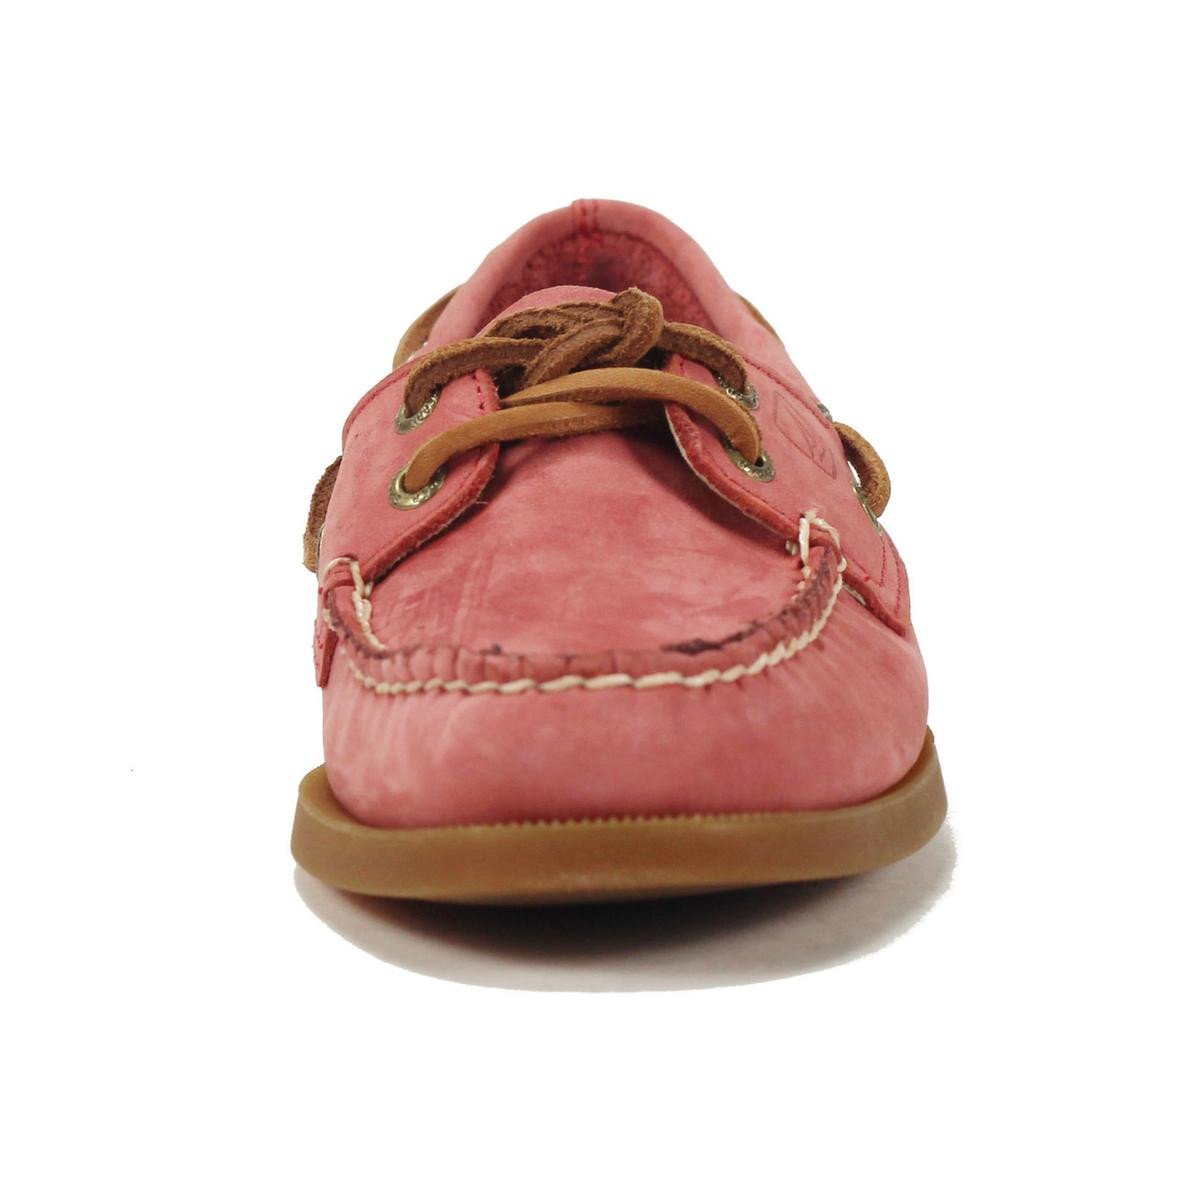 Sperry Topsider for Women: A/O Washed Red Boat Shoe